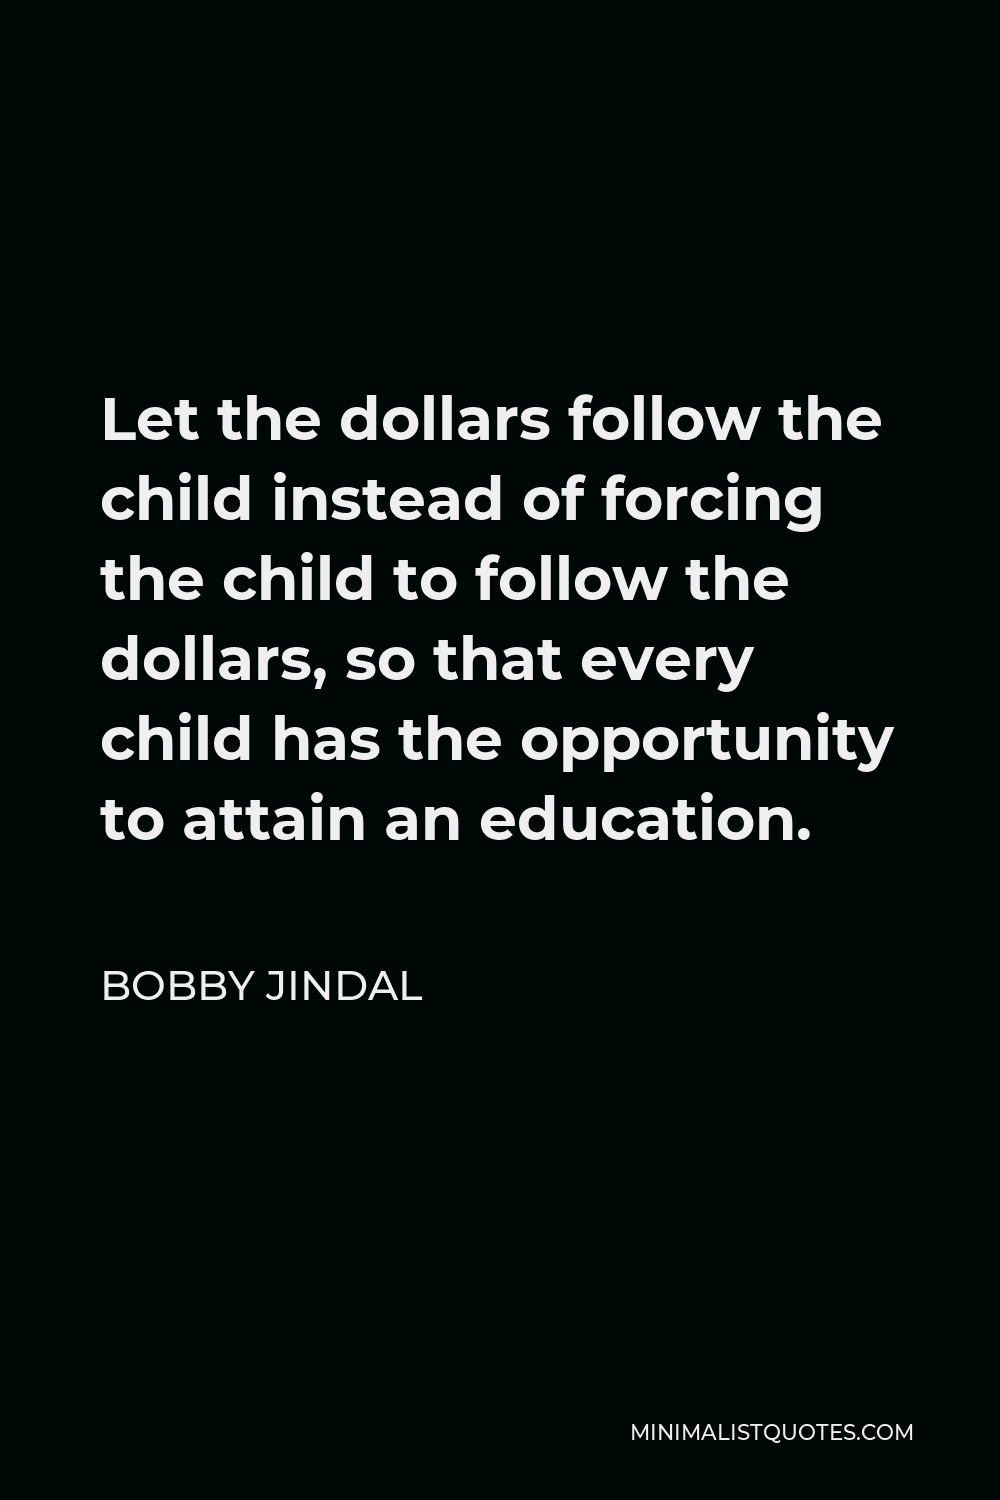 Bobby Jindal Quote - Let the dollars follow the child instead of forcing the child to follow the dollars, so that every child has the opportunity to attain an education.